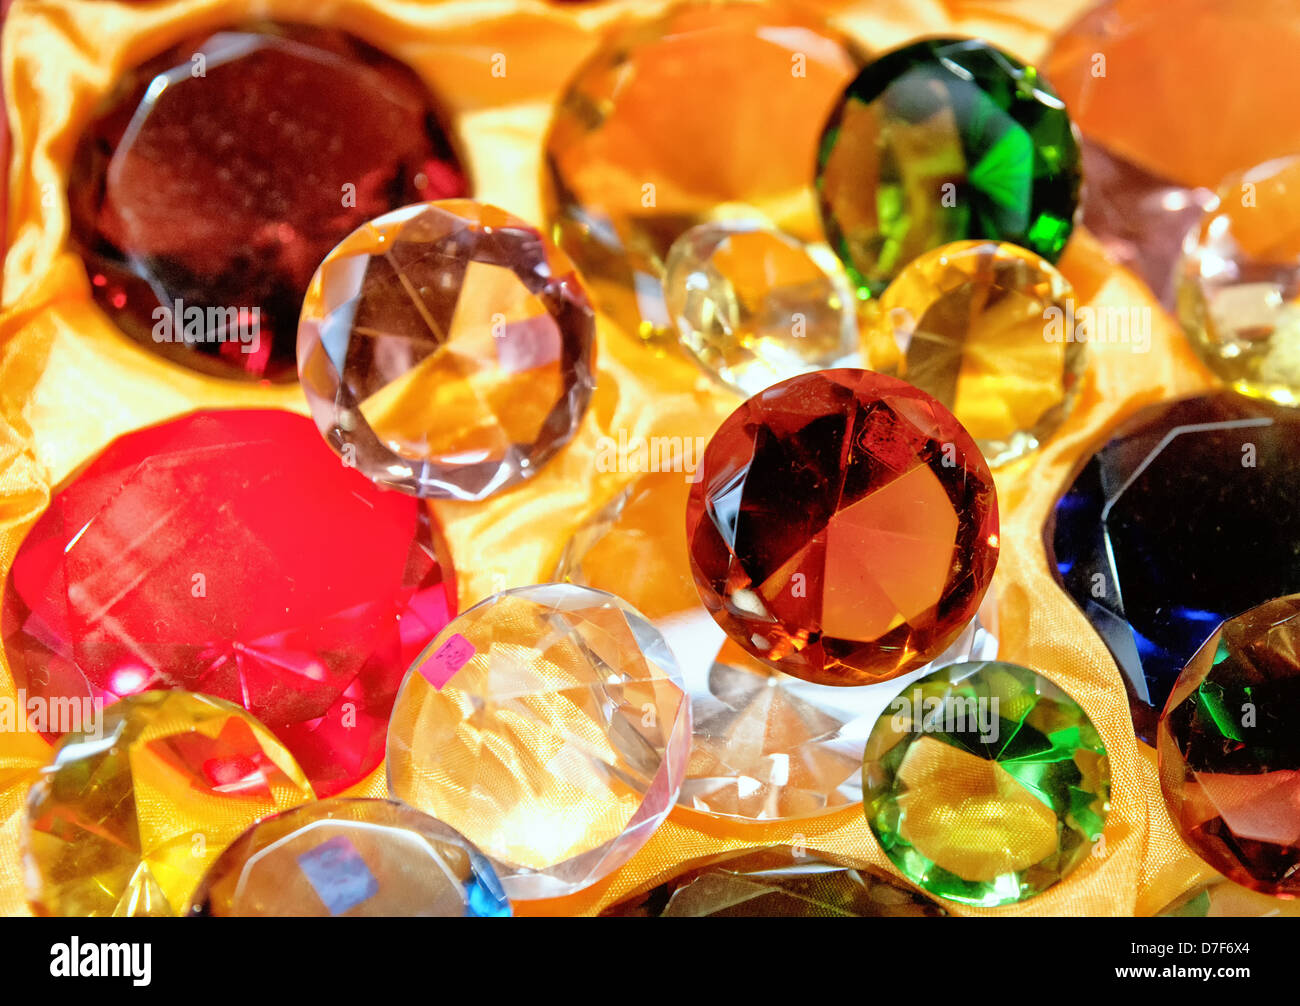 glass gems on yellow fabric for sale Stock Photo